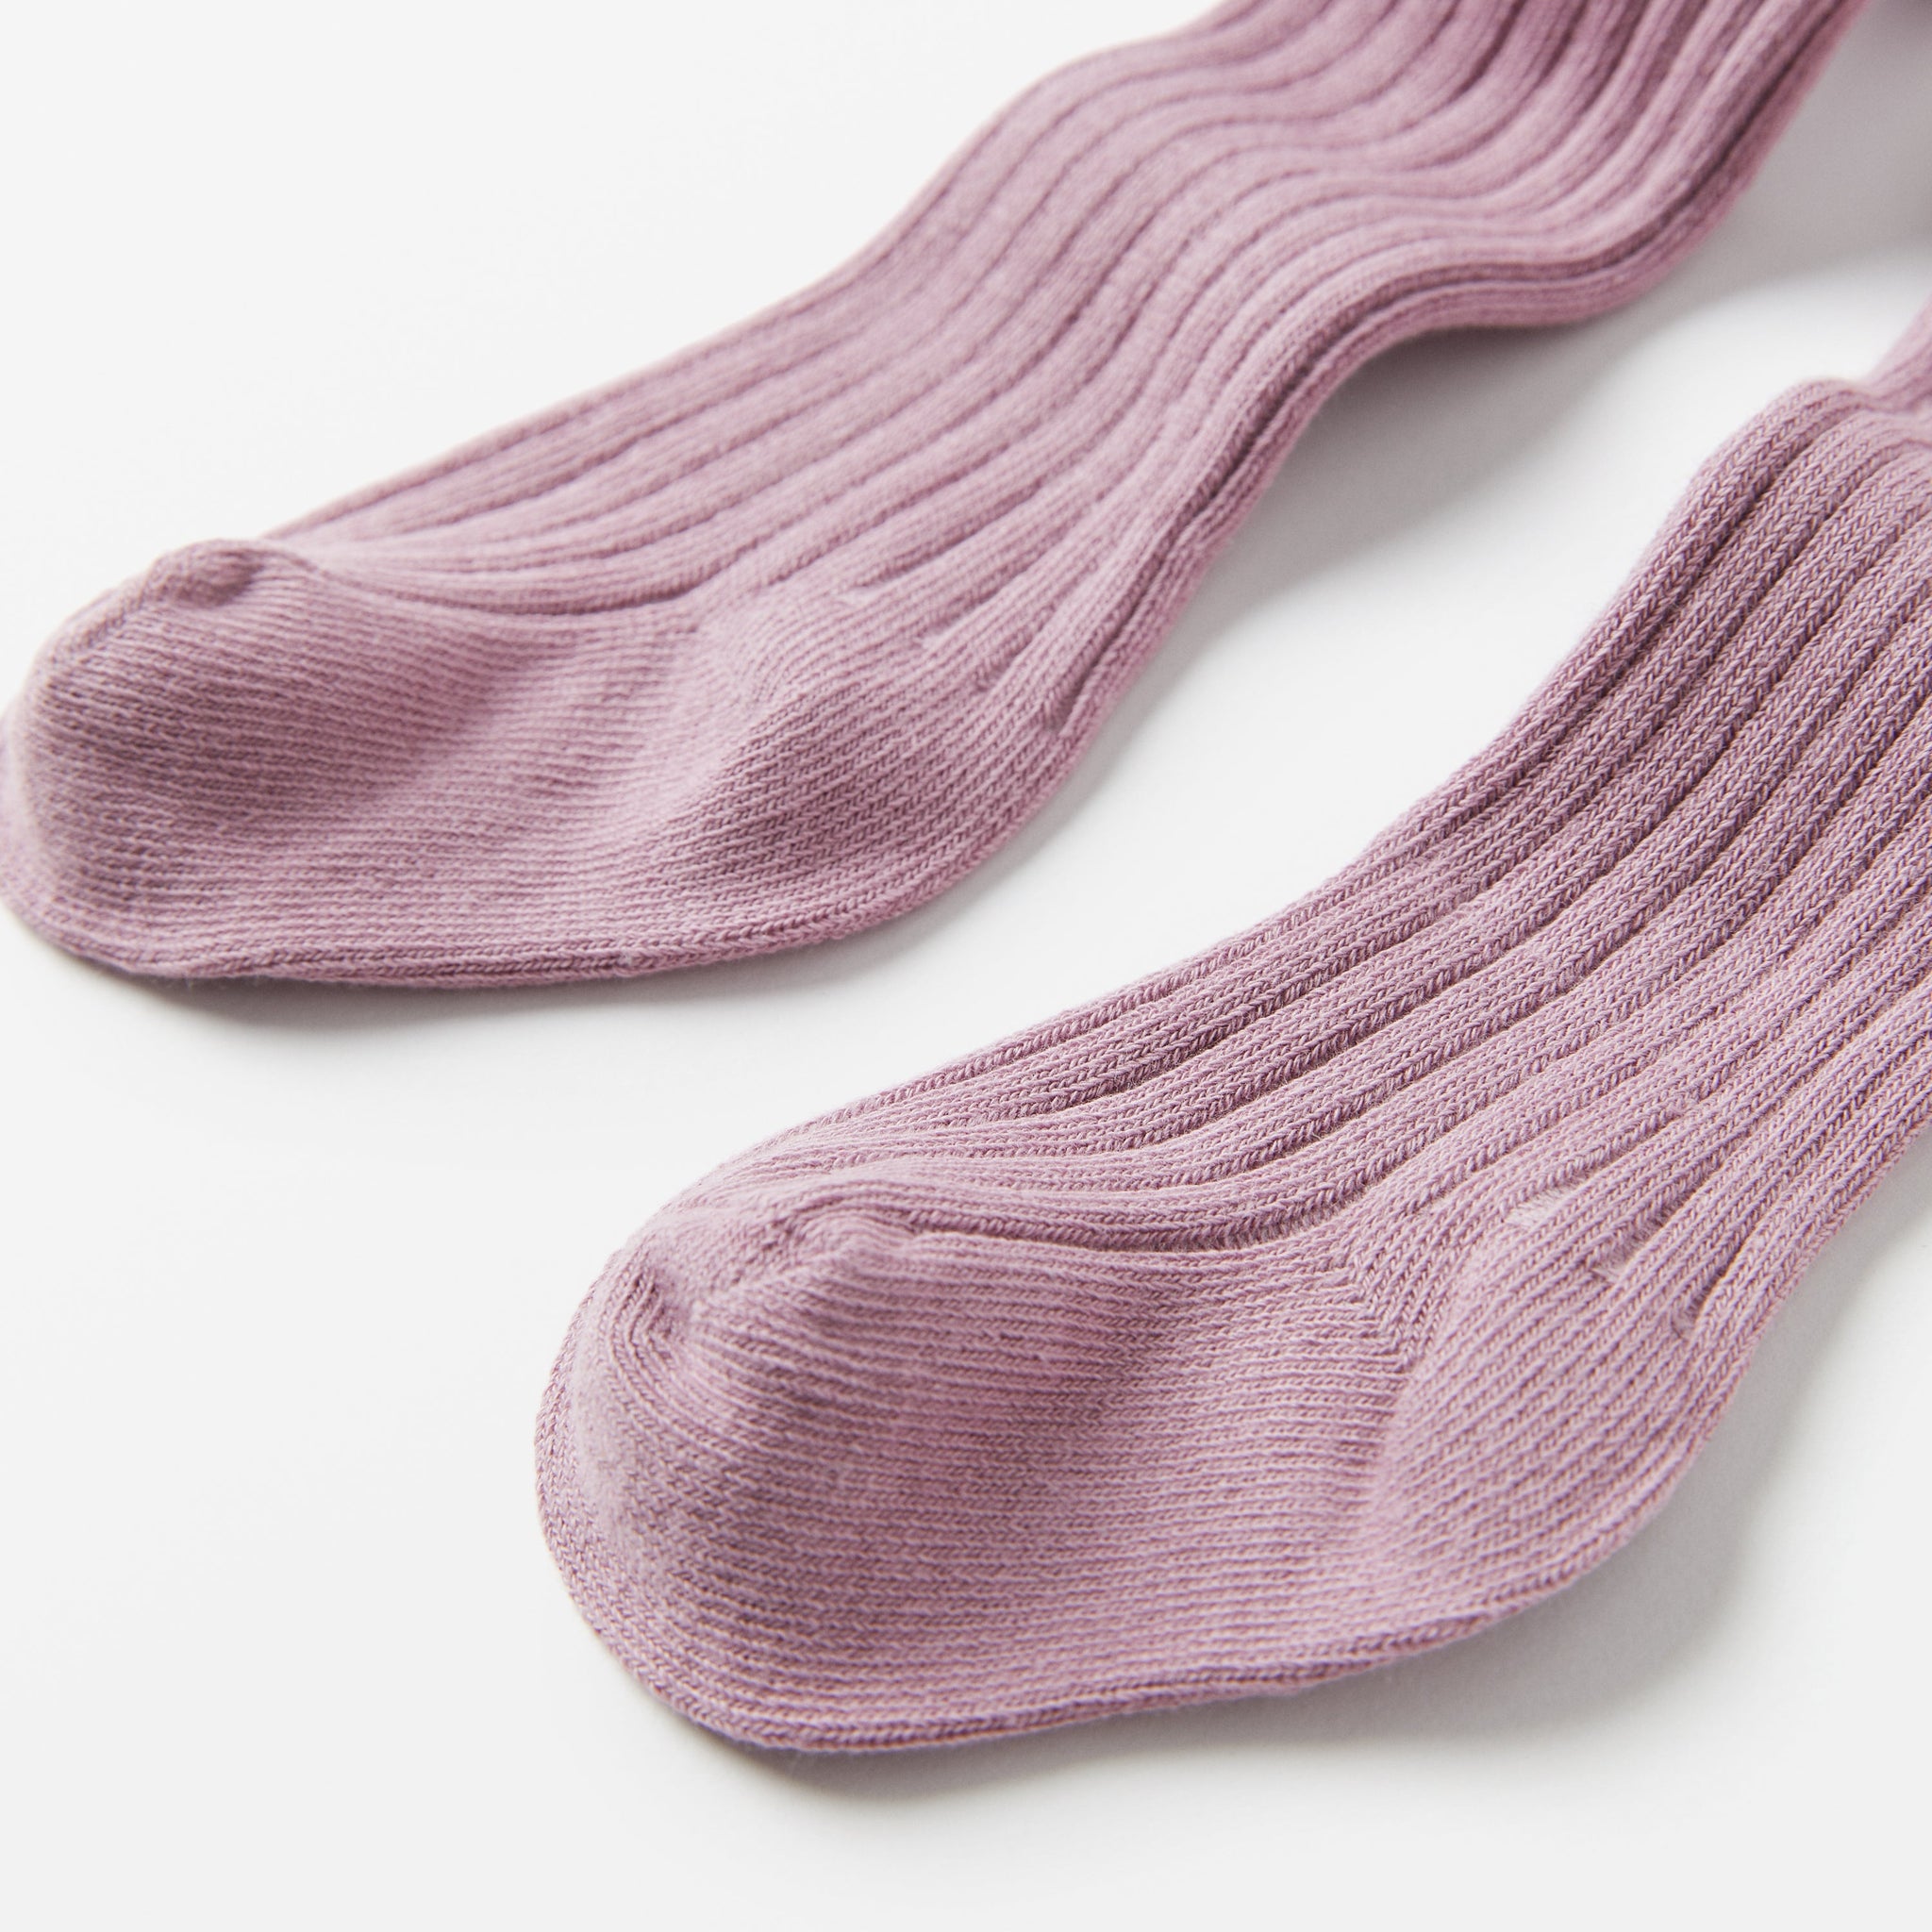 Ribbed Cotton Pink Baby Tights from the Polarn O. Pyret babywear collection. Clothes made using sustainably sourced materials.